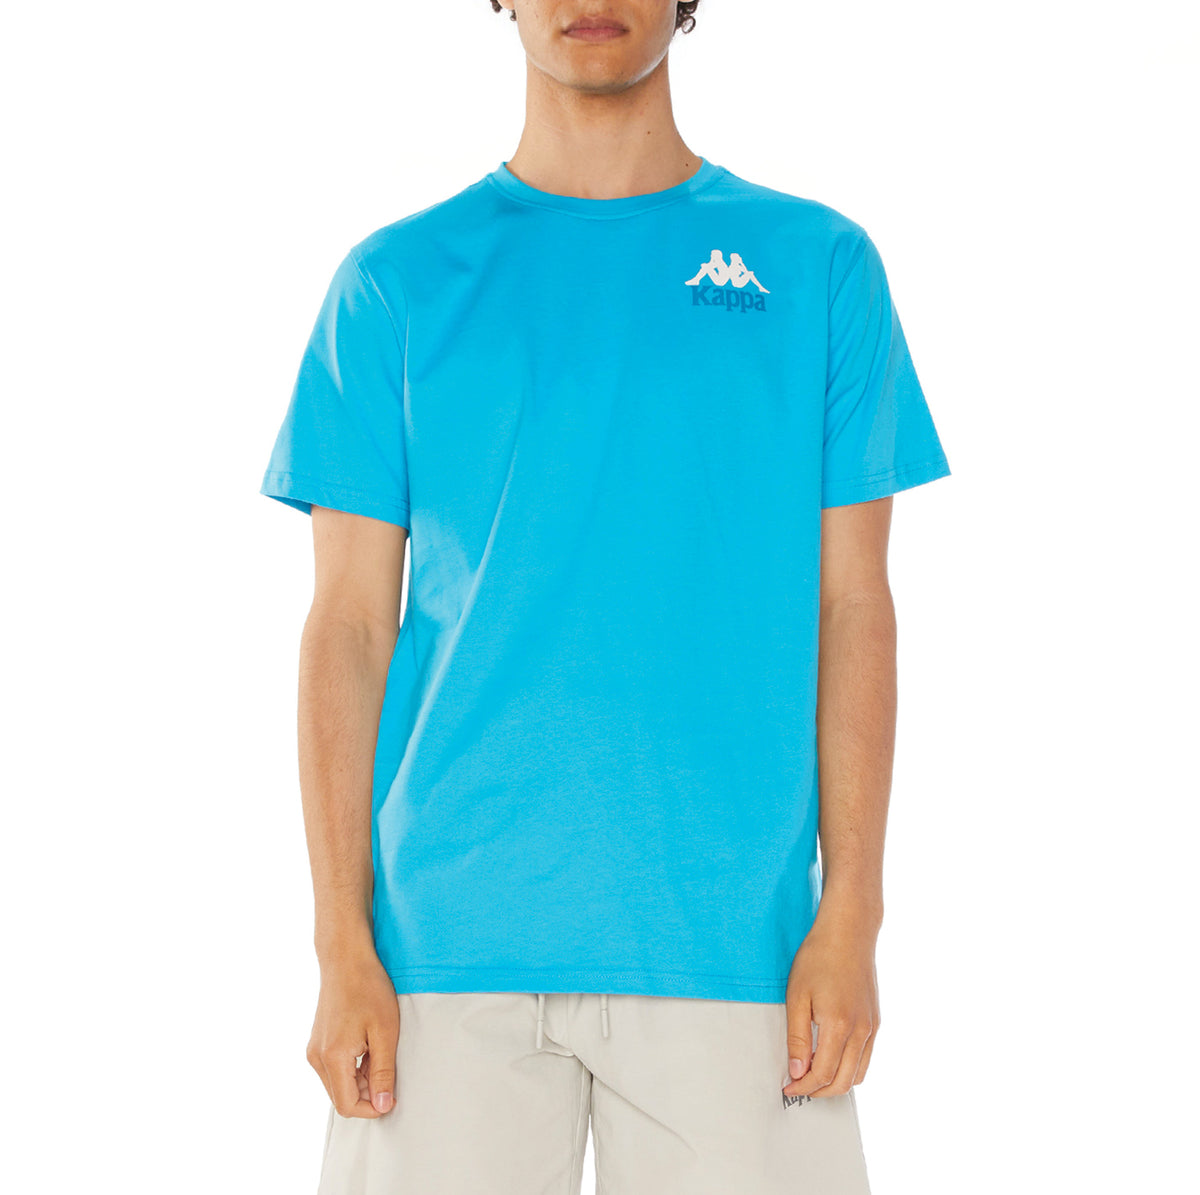 Shop Authentic Ables T-Shirt - Turquoise Kappa US . You are guaranteed to  be happy